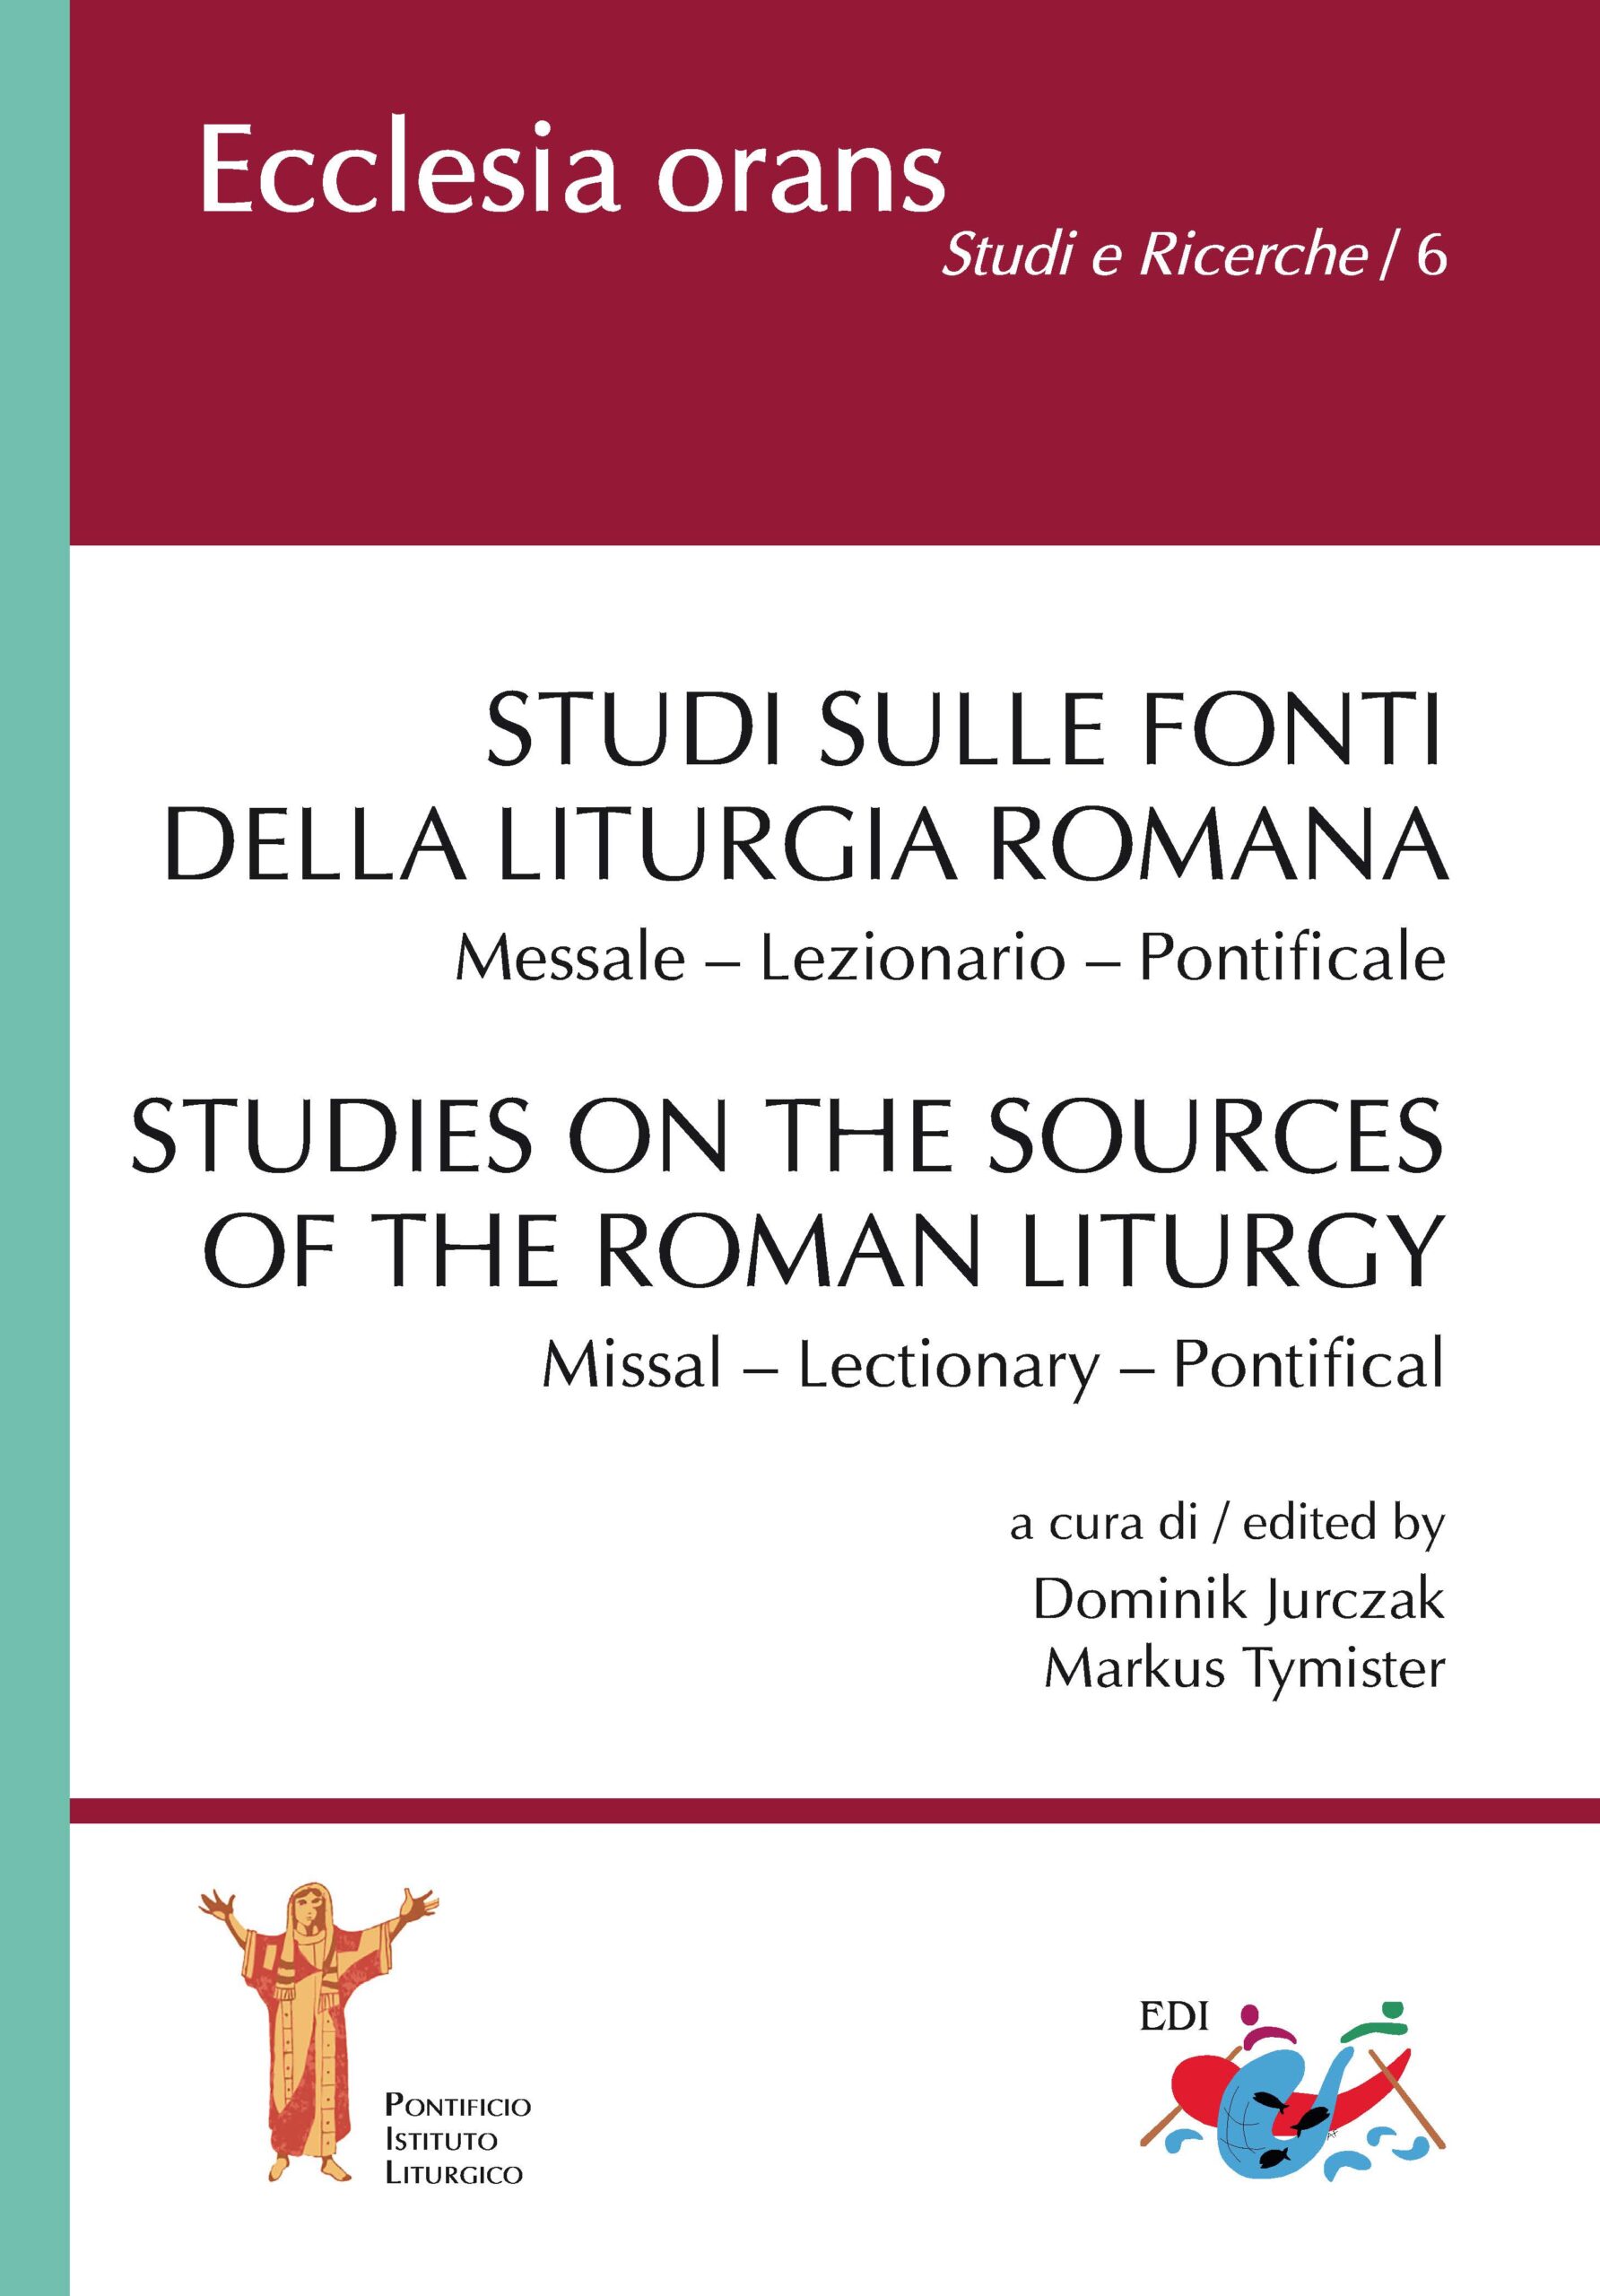 STUDIES ON THE SOURCES OF THE ROMAN LITURGY book cover